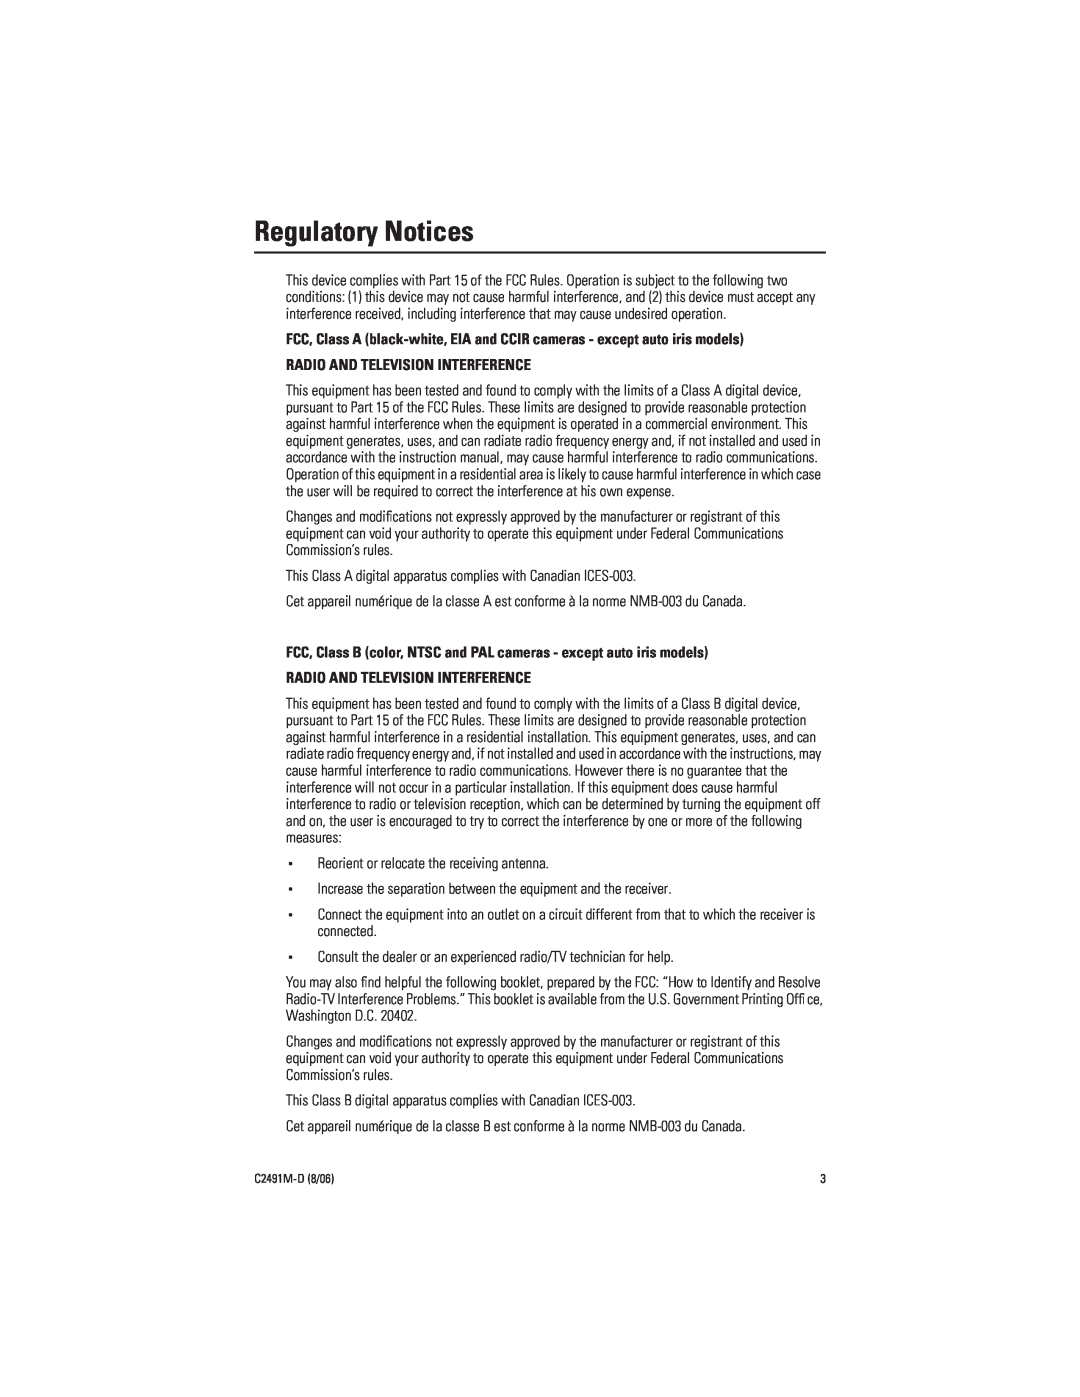 Pelco ICS210 manual Regulatory Notices, Radio And Television Interference 